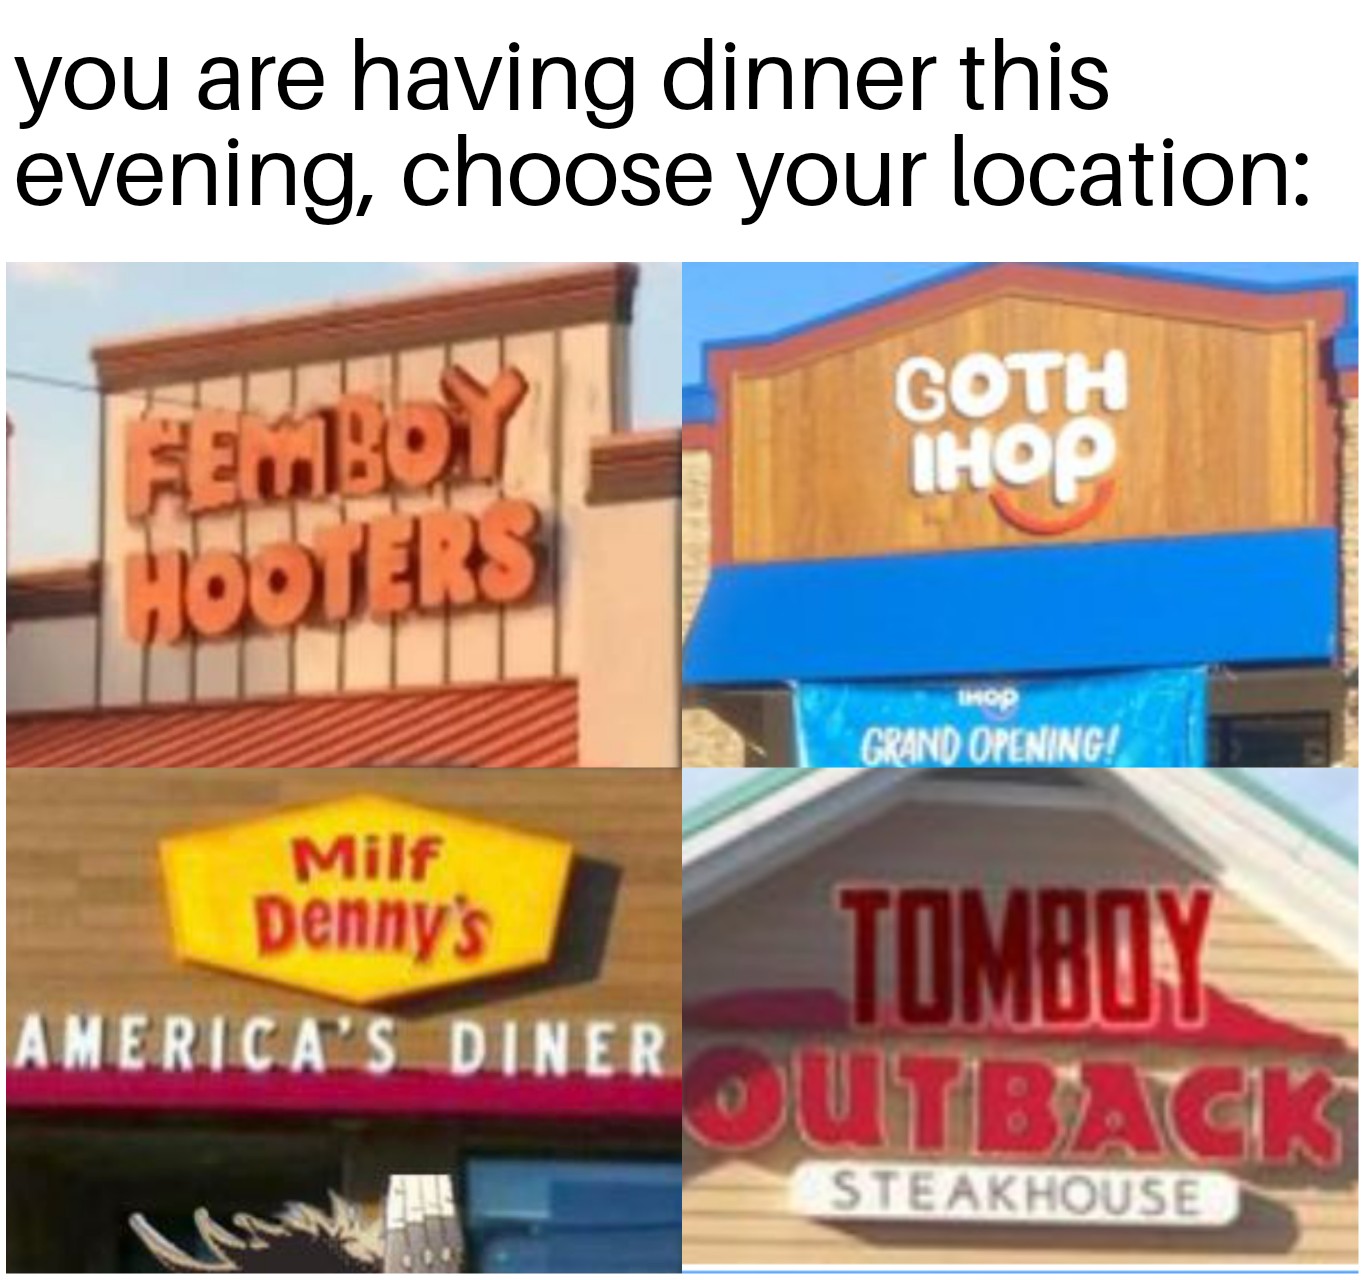 get it done - you are having dinner this evening, choose your location Febo Goth Ihop Hooters Ihop Grand Opening! Milf Denny's America'S Dineroutback Tomboy Steakhouse